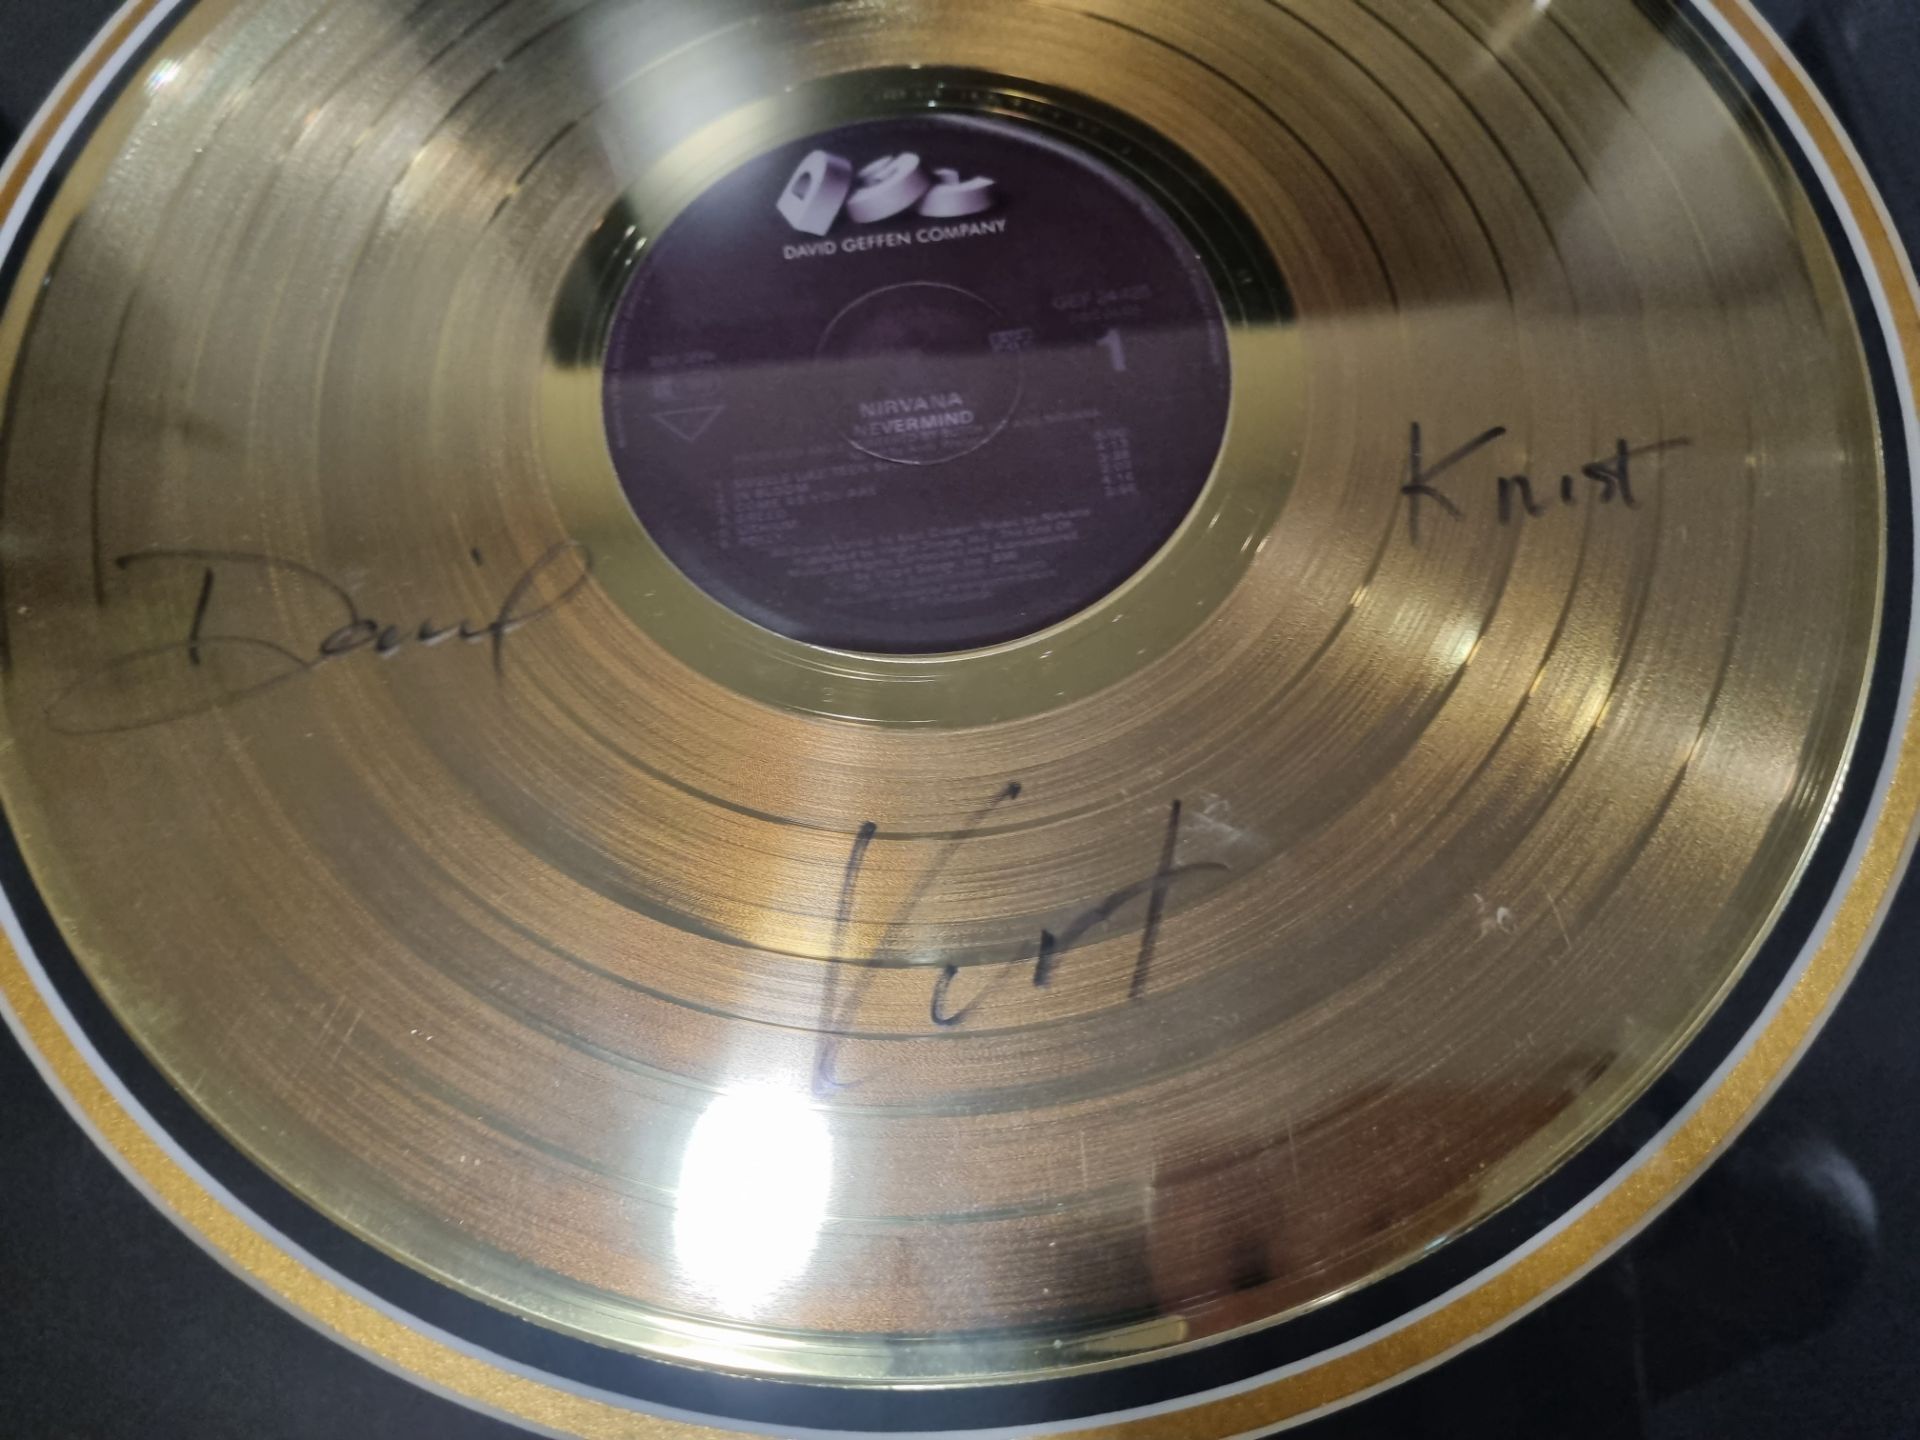 Reproduction The Nirvana 24 Carat Gold Plated LP Record  Framed complete with a note that reads "Was - Image 4 of 4